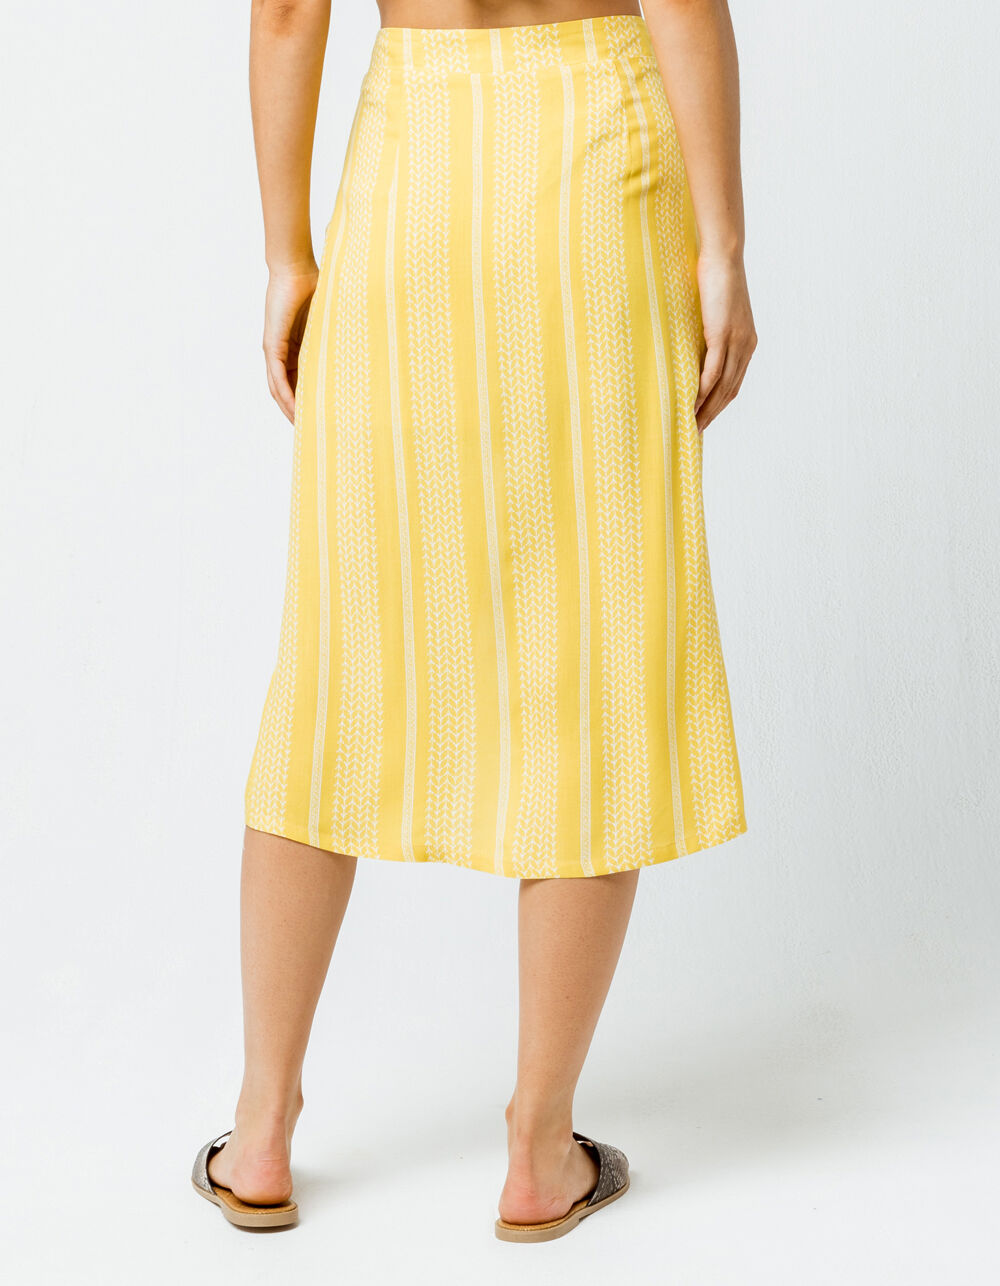 SKY AND SPARROW Button Front Midi Skirt - YELLOW COMBO | Tillys